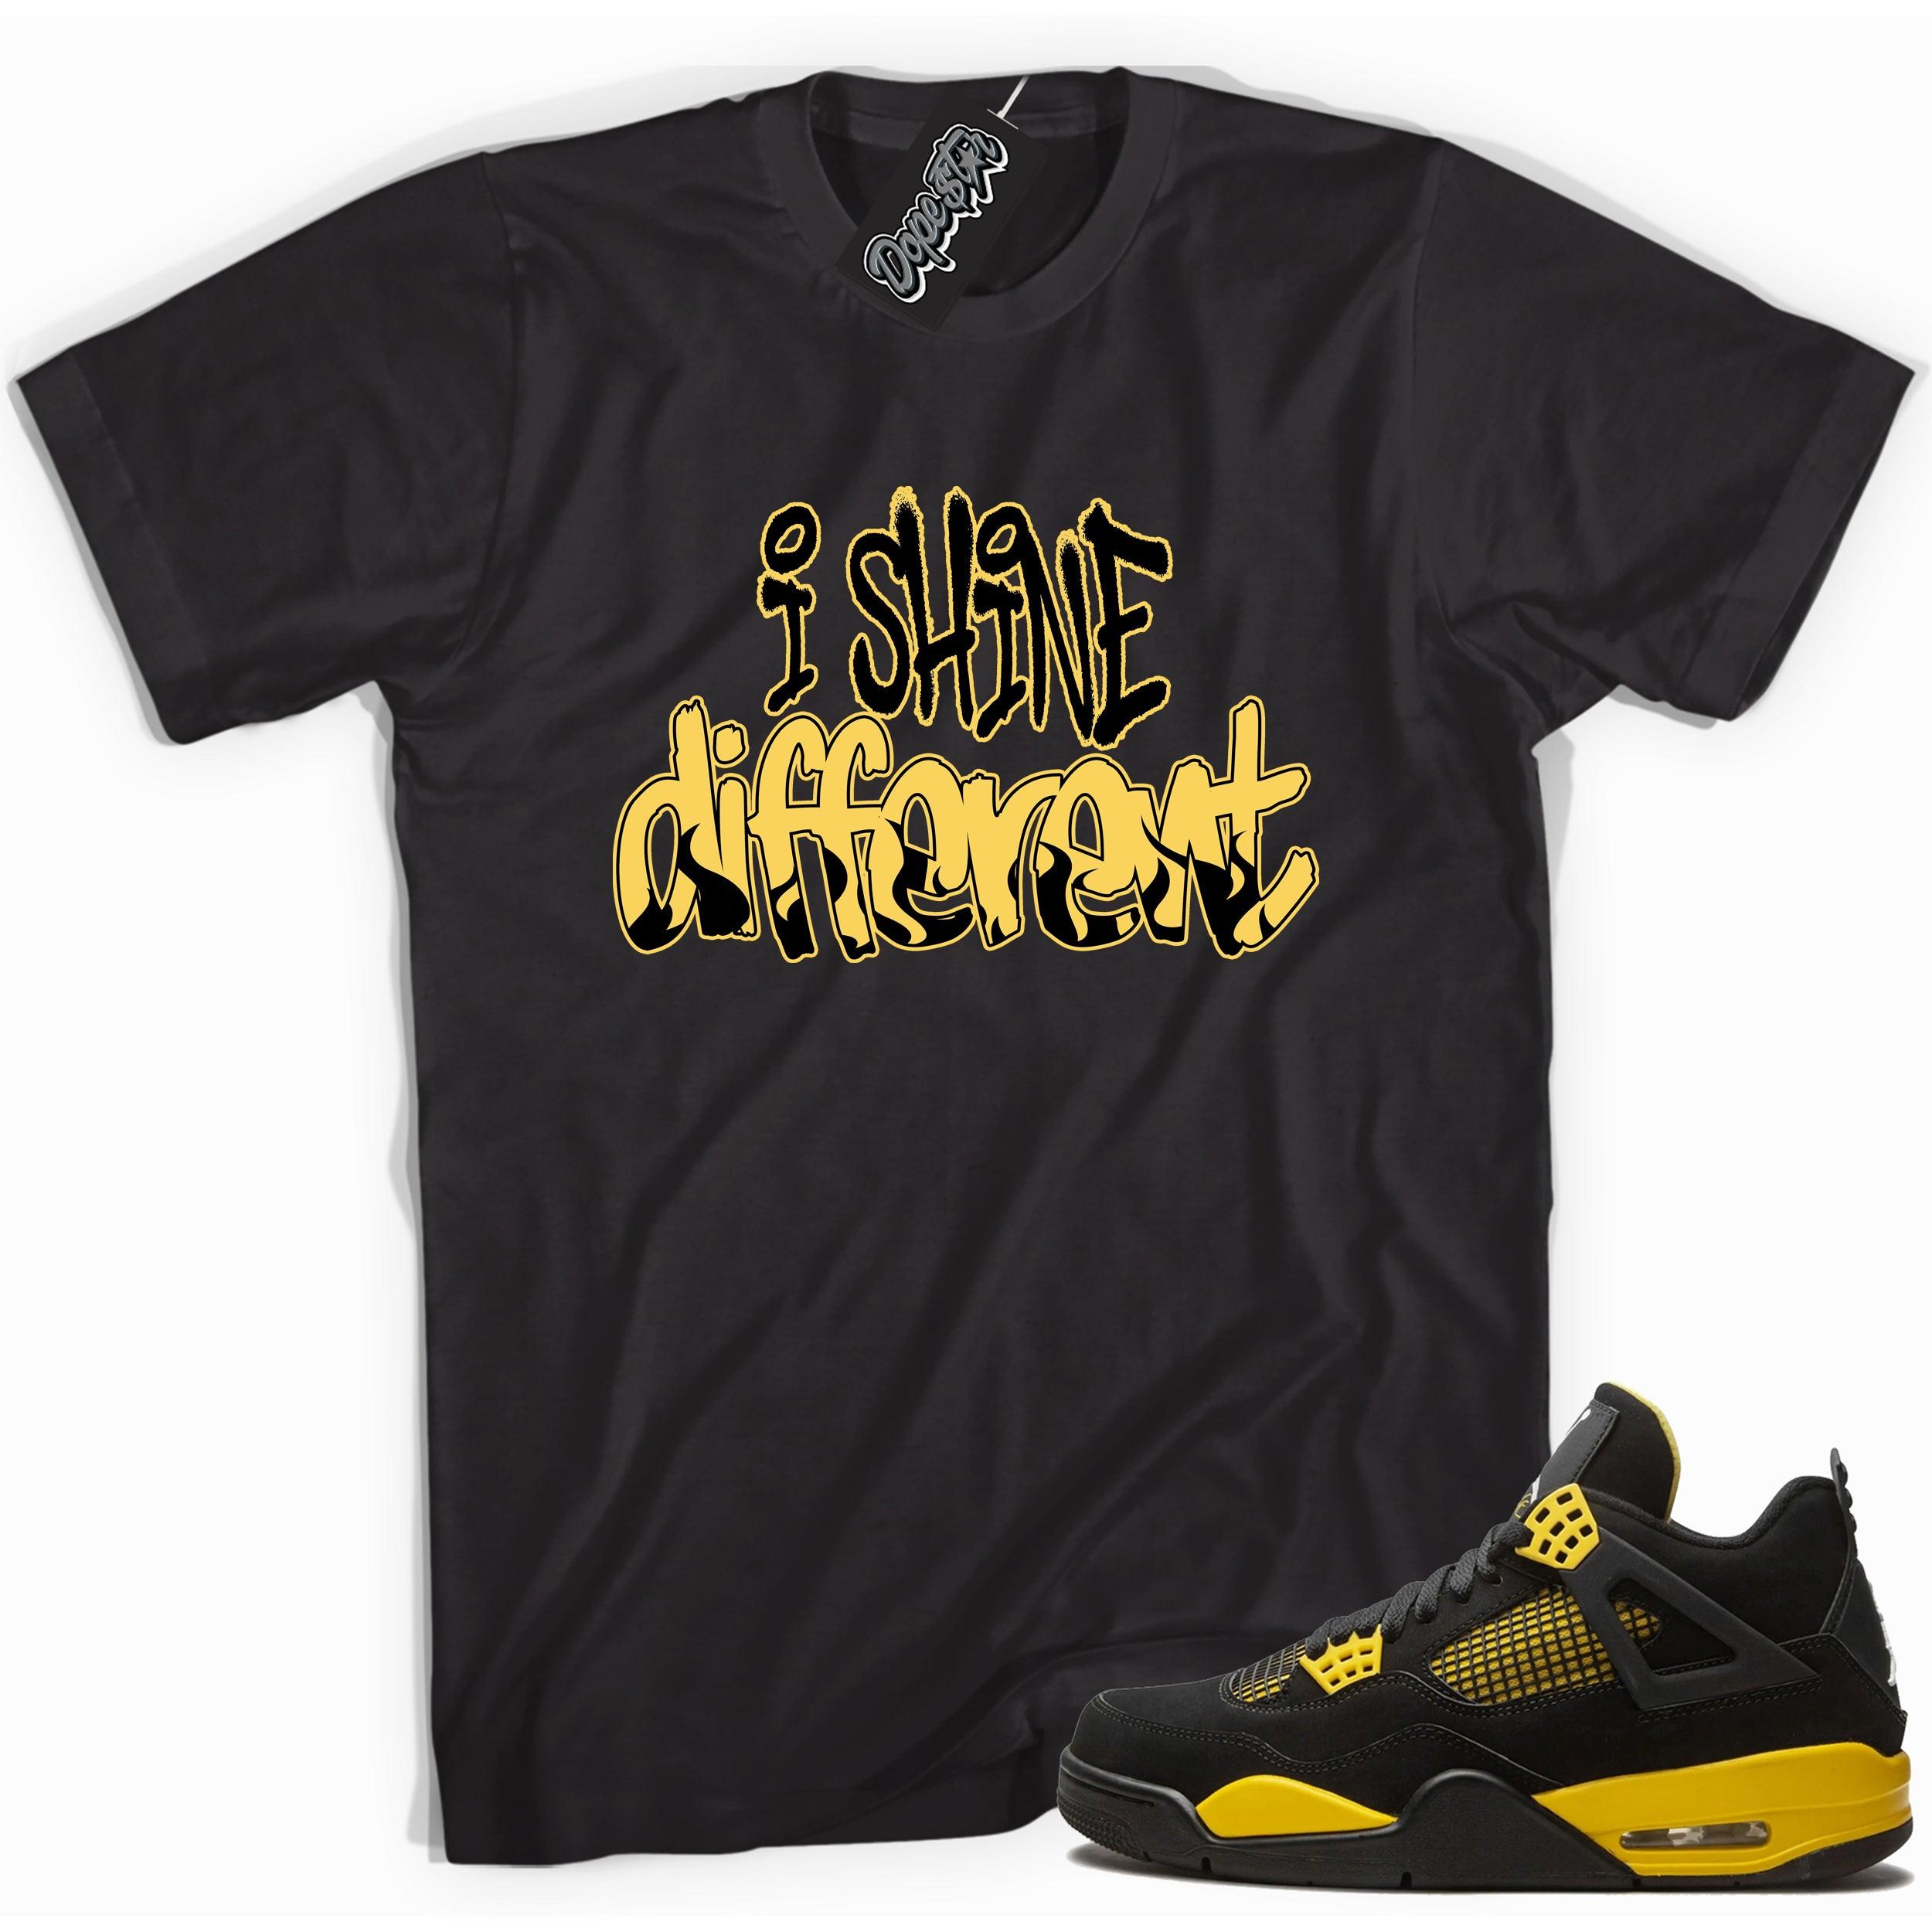 Cool black graphic tee with 'i shine different' print, that perfectly matches  Air Jordan 4 Thunder sneakers